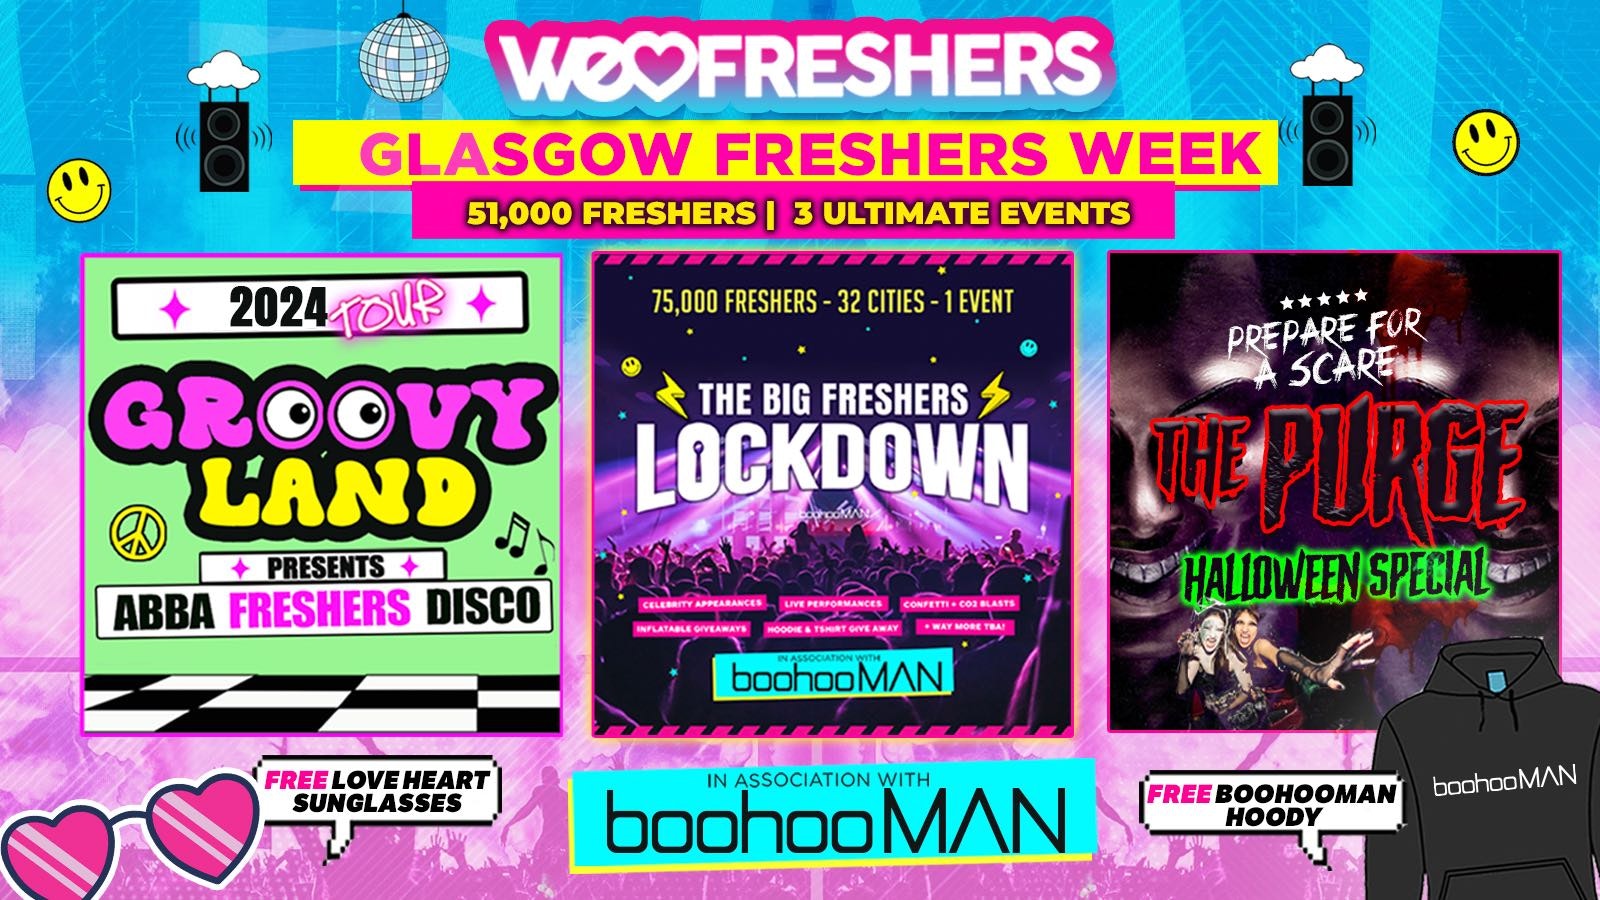 WE LOVE GLASGOW FRESHERS 2024 in association with boohooMAN ❗3 EVENTS ❗